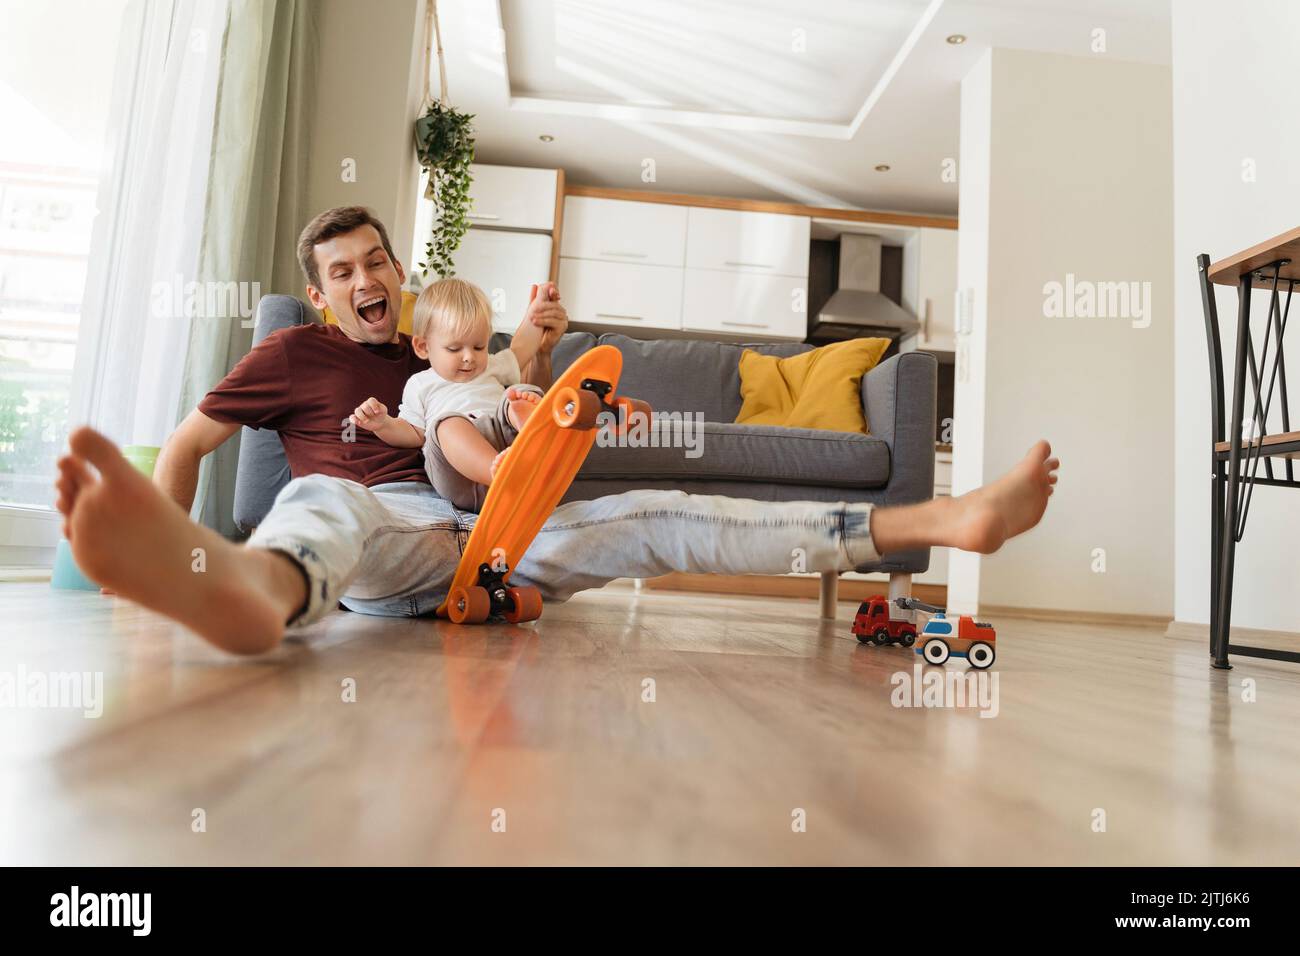 Funny image of happy cheerful baby boy spending time with his caring dad or brother sitting on floor wheeling skateboard, pretending like falling down, father entertaining his son at home. Fatherhood Stock Photo